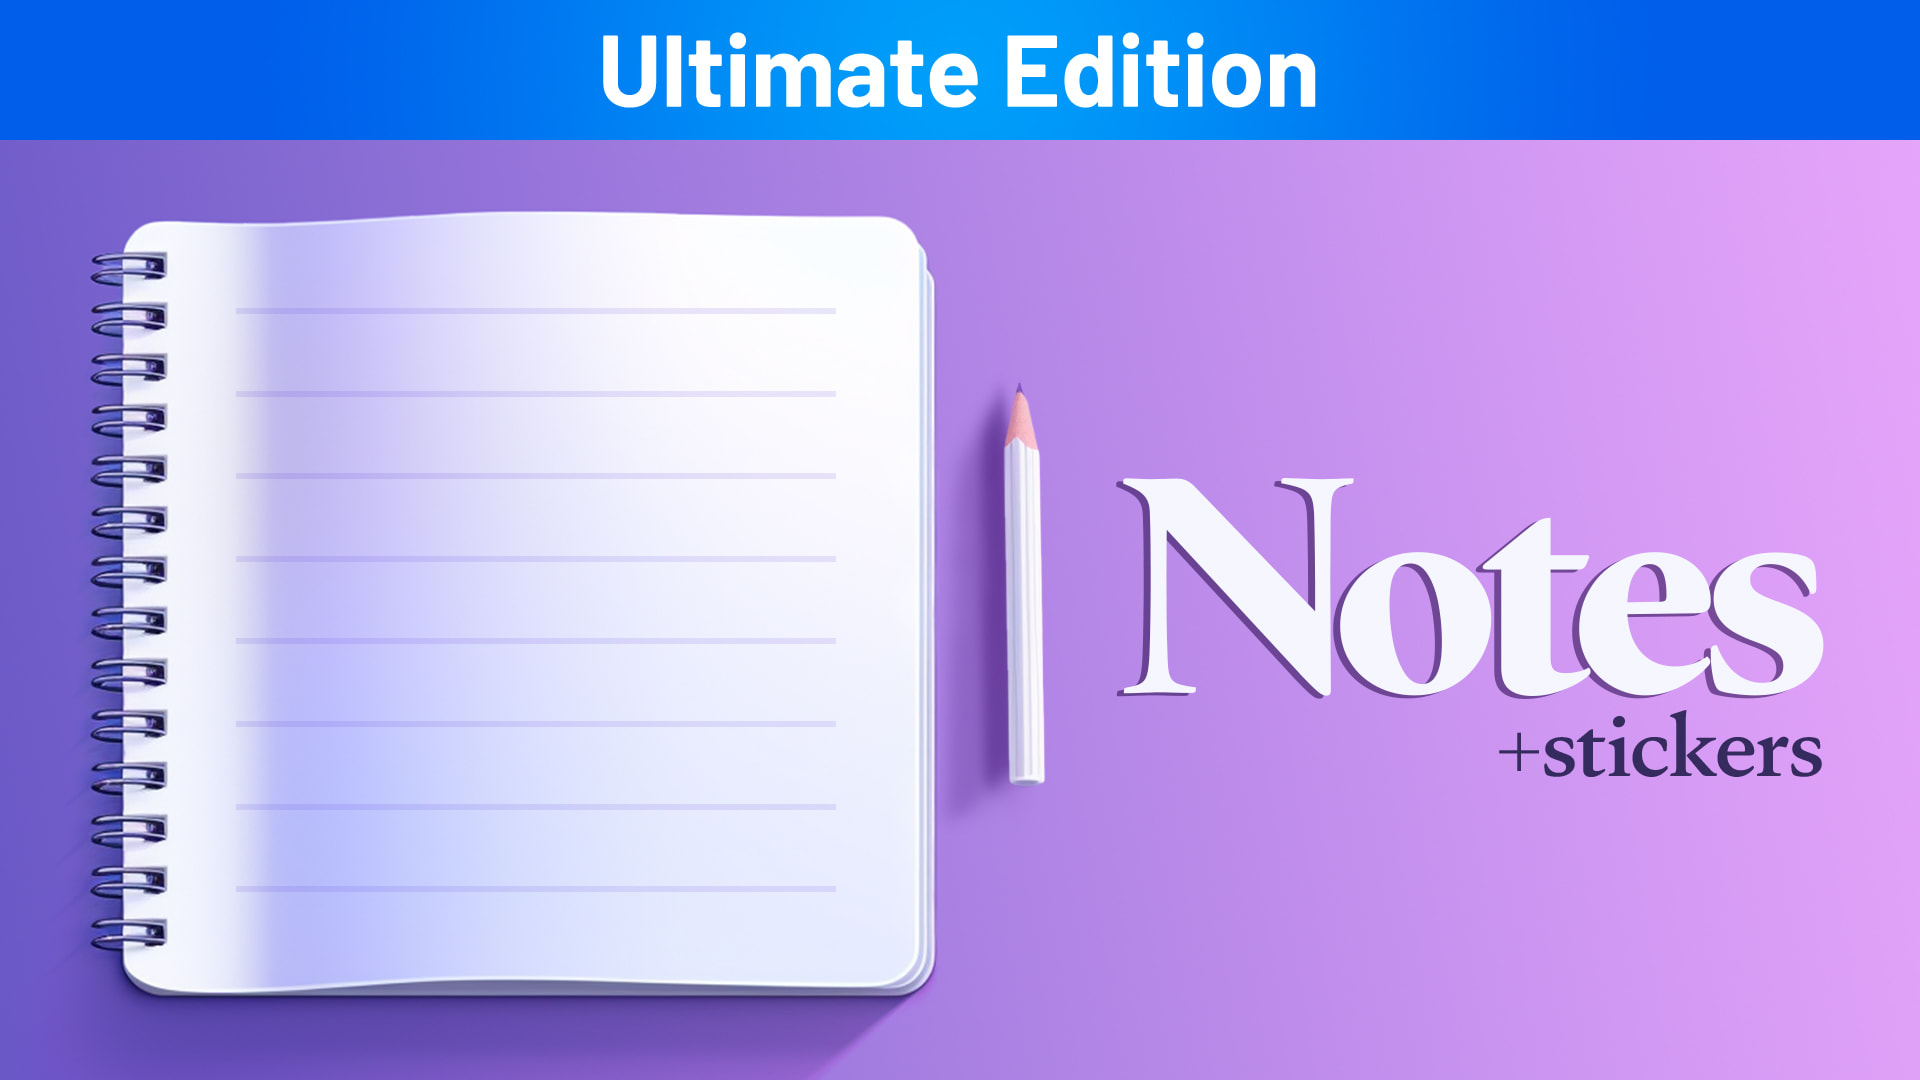 Notes + Stickers Ultimate Edition